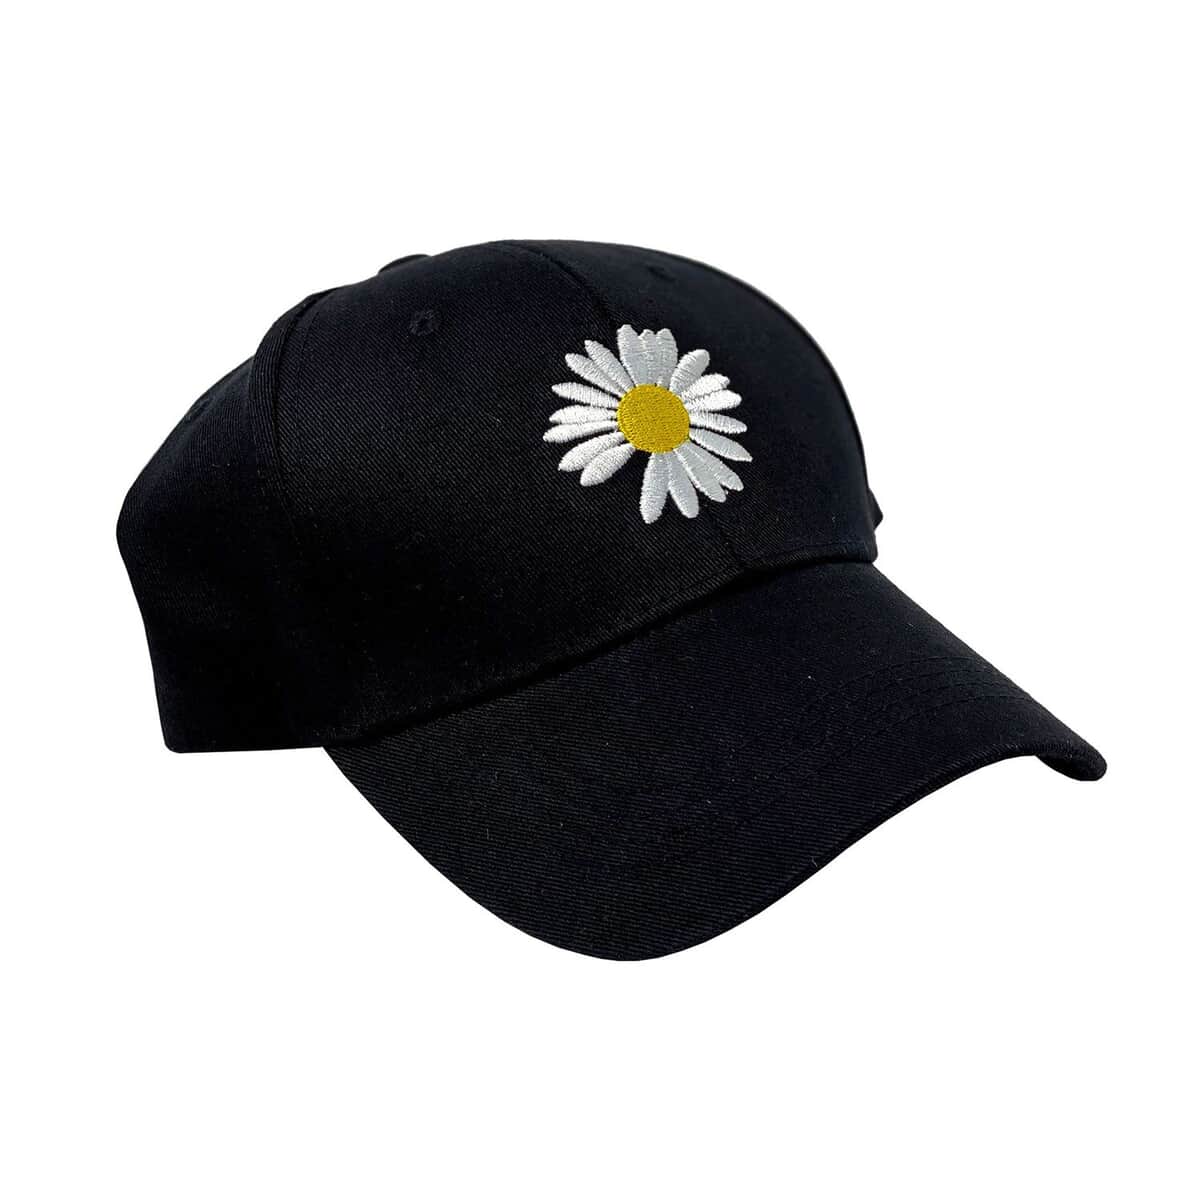 Flower Embroidered Baseball Cap - White/Yellow Flower image number 0